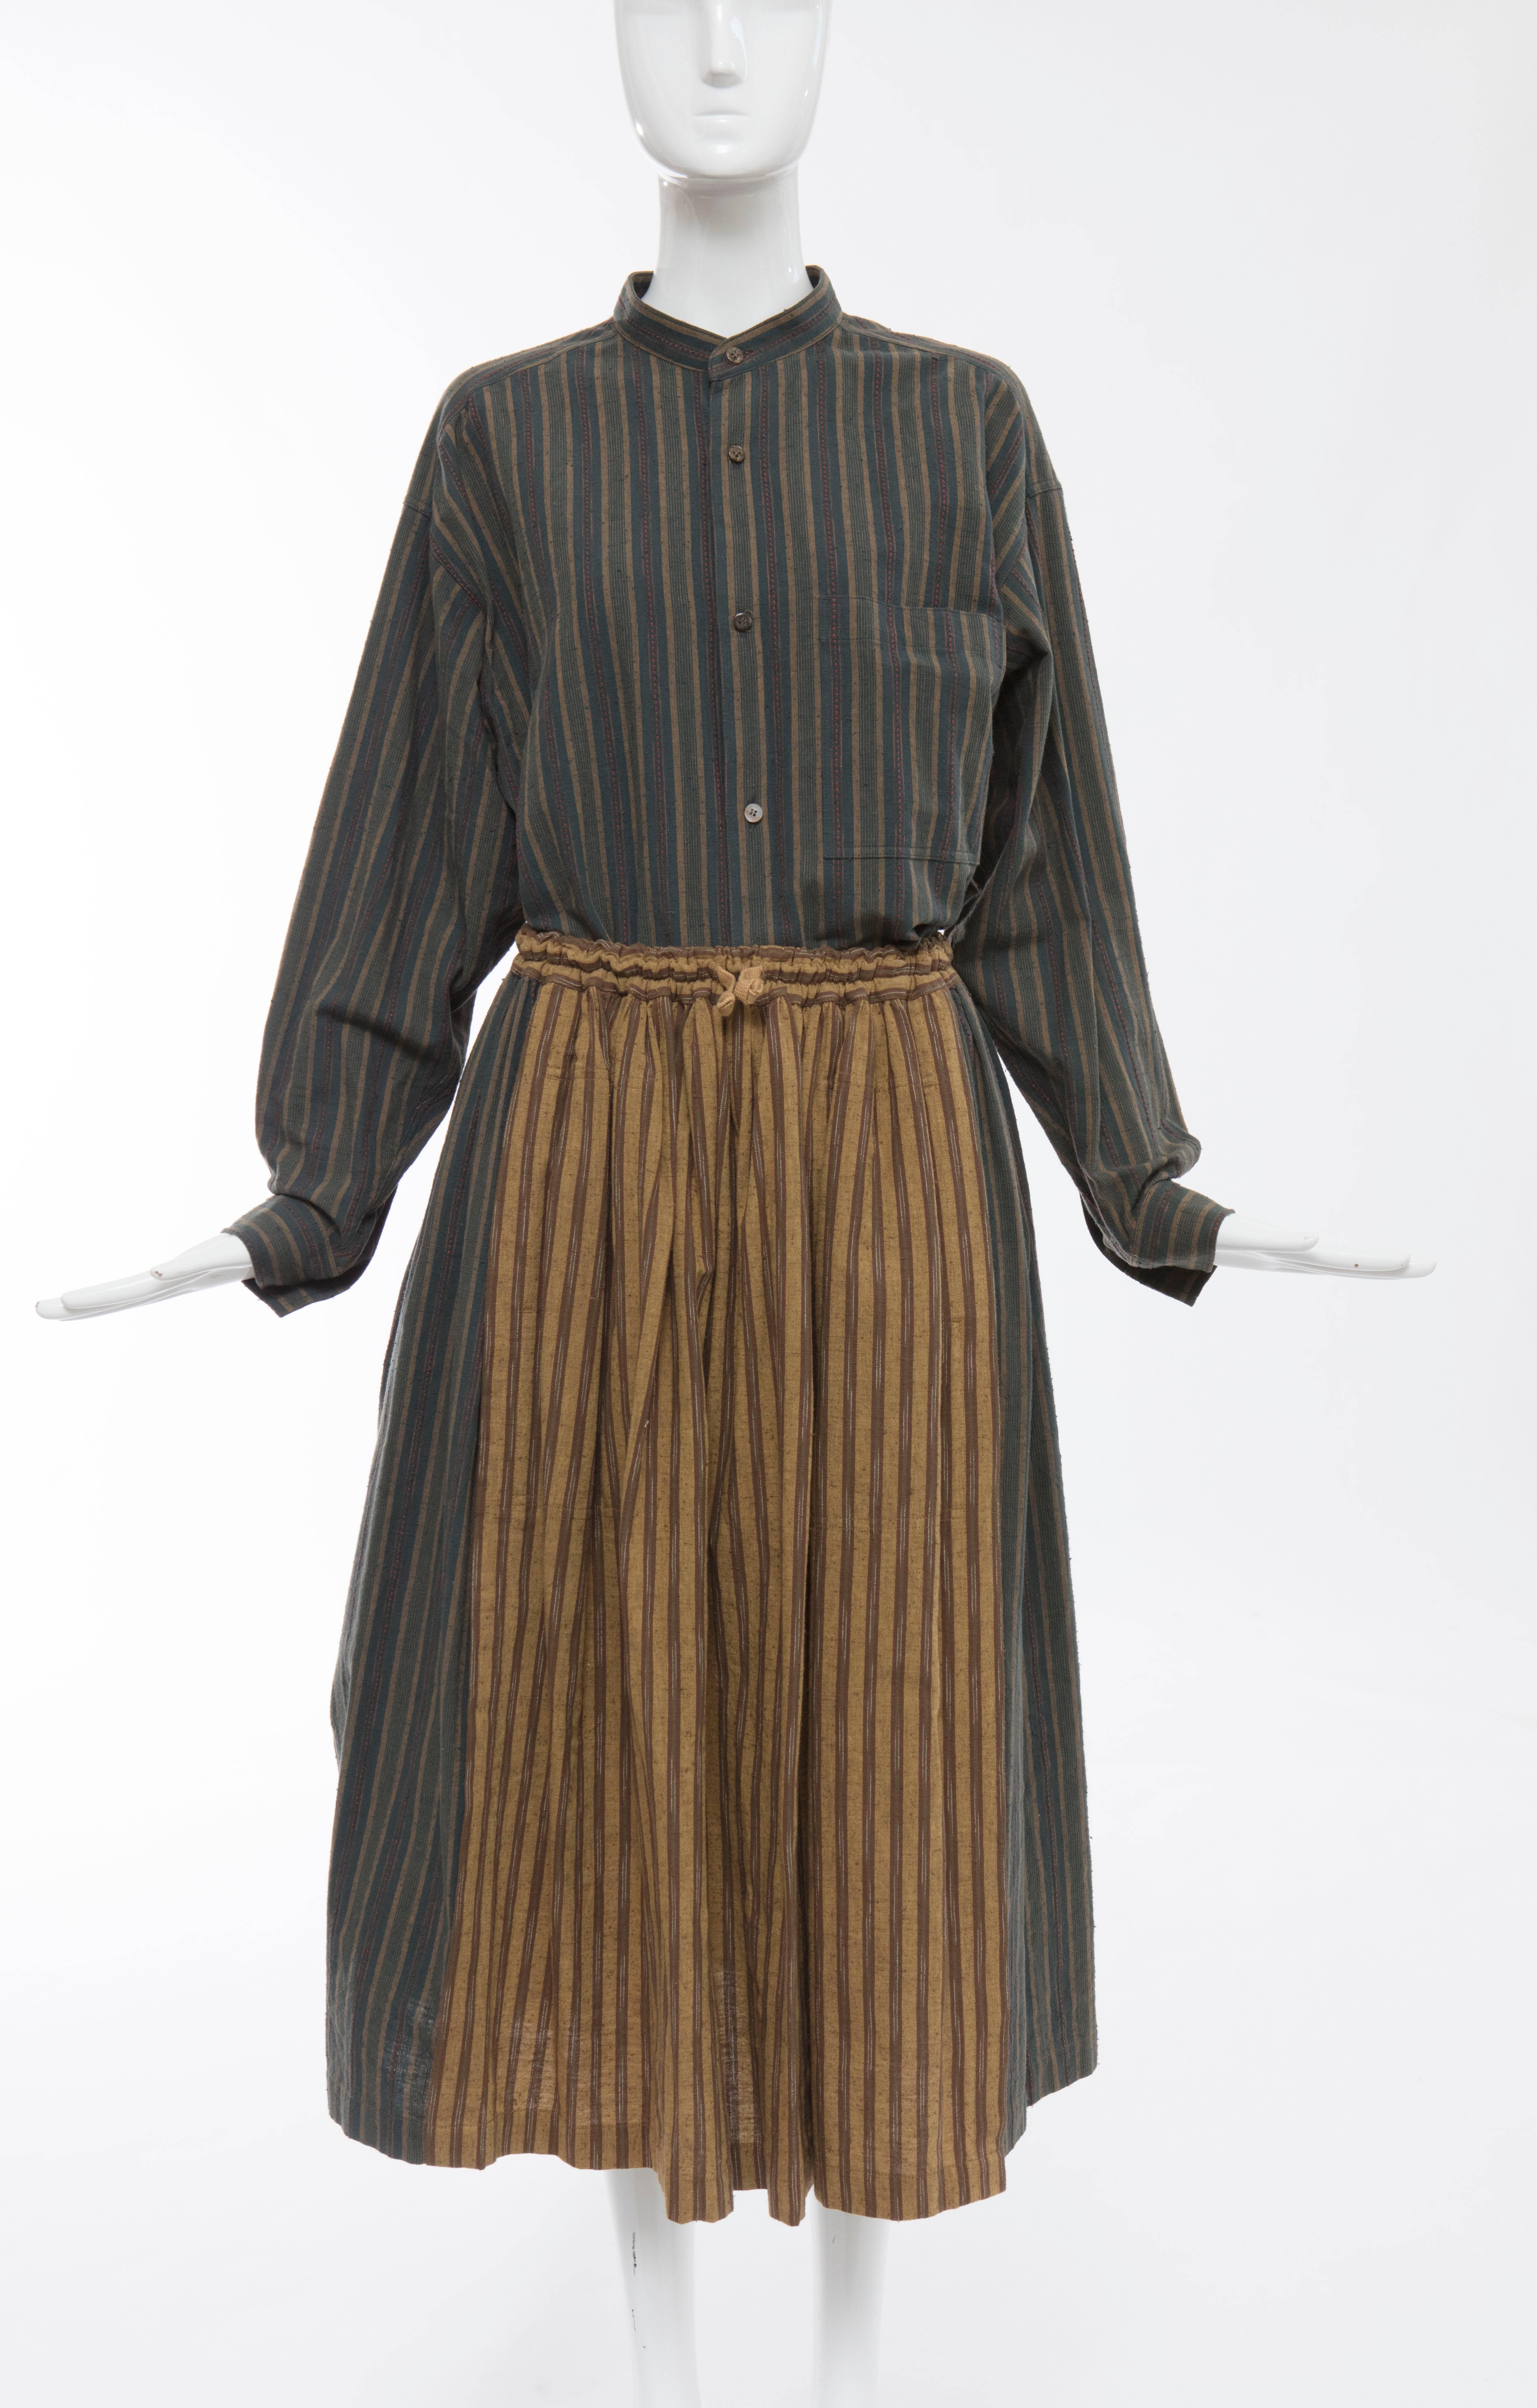 Issey Miyake Plantation, circa 1980's striped woven cotton skirt suit. Button front long sleeve shirt with front pocket, elastic waist skirt with two front pockets.

Shirt Japan: Size Medium
Bust 49, Waist 48, Sleeve 21, Length 30

Skirt Japan: